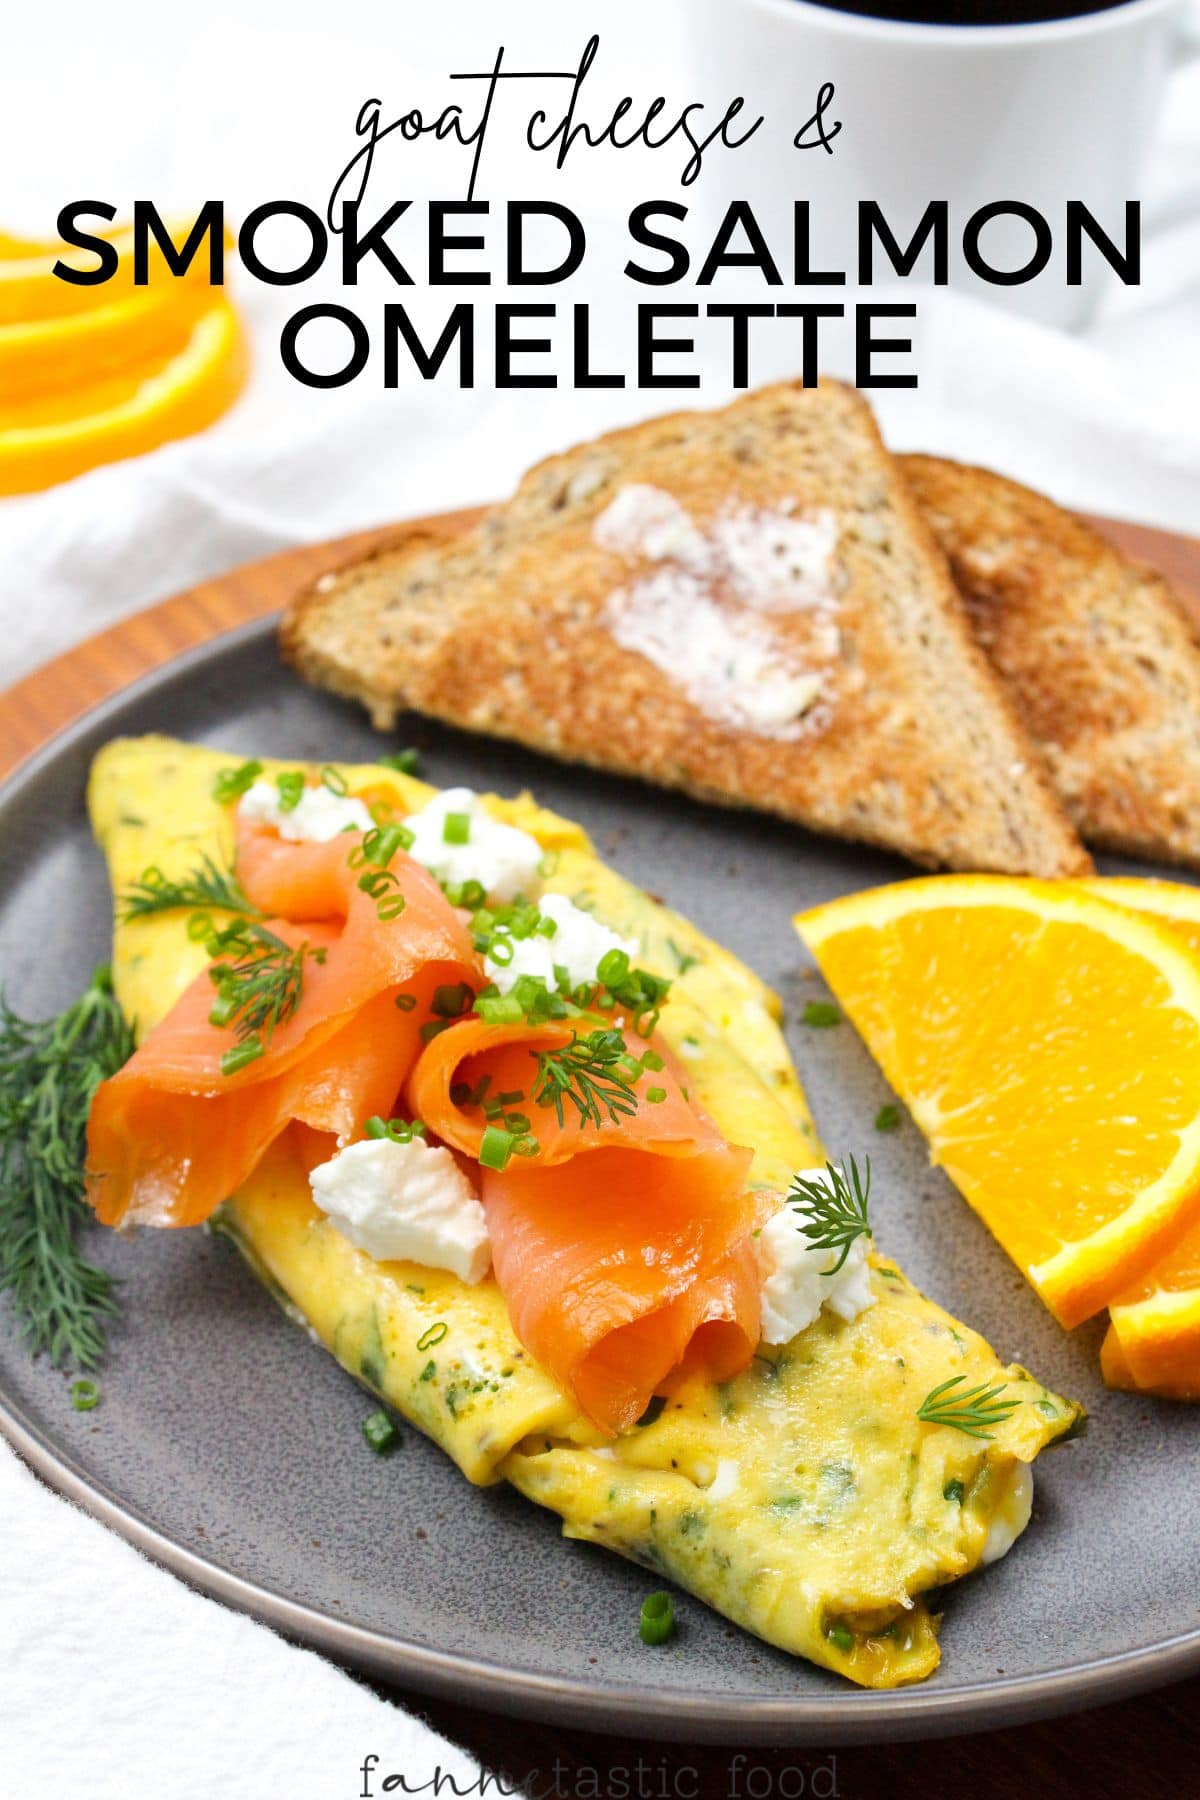 smoked salmon omelette with goat cheese